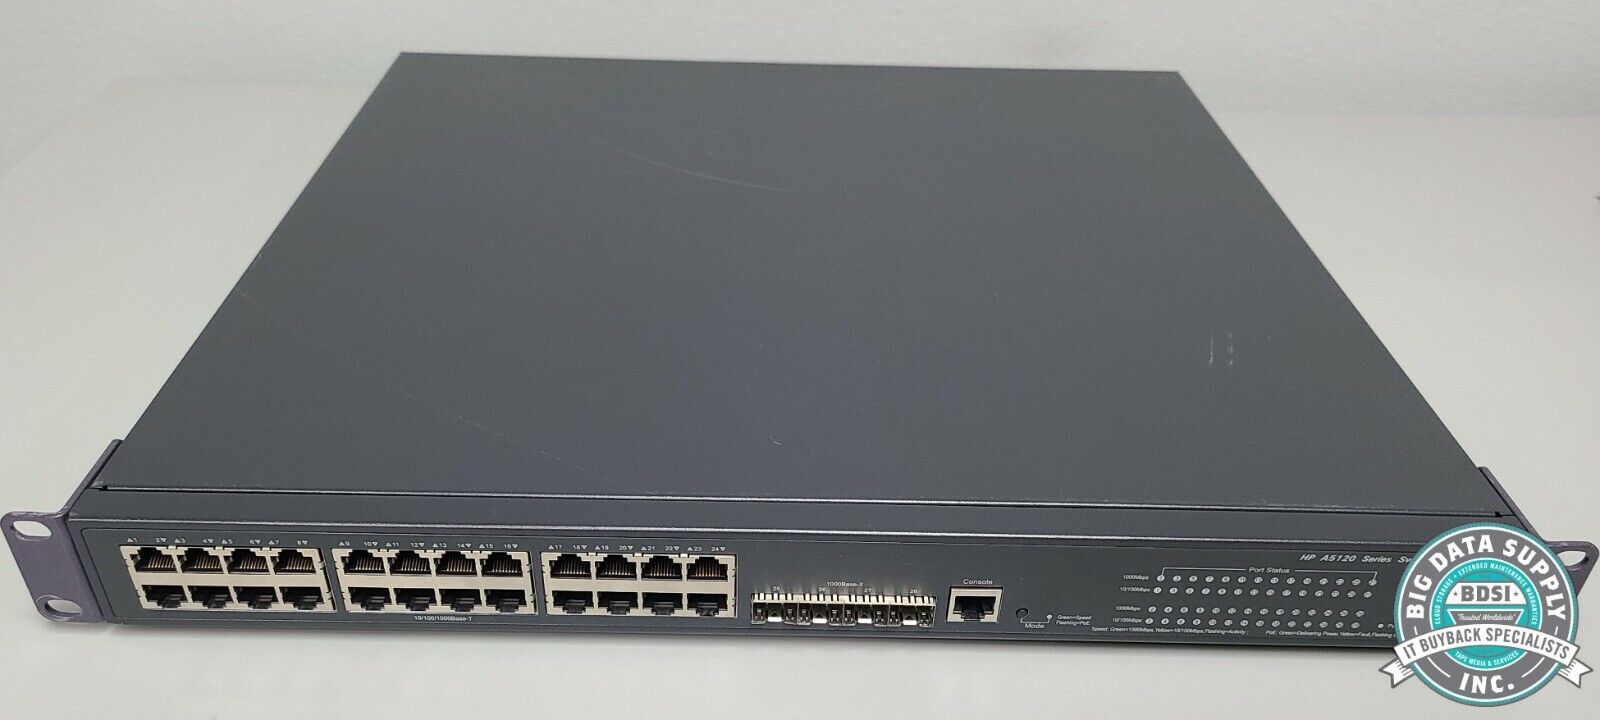 HP, A5120-24G-PPoE+ SI 24-Port Manageable Gigabit Ethernet Switch P/N JG092A